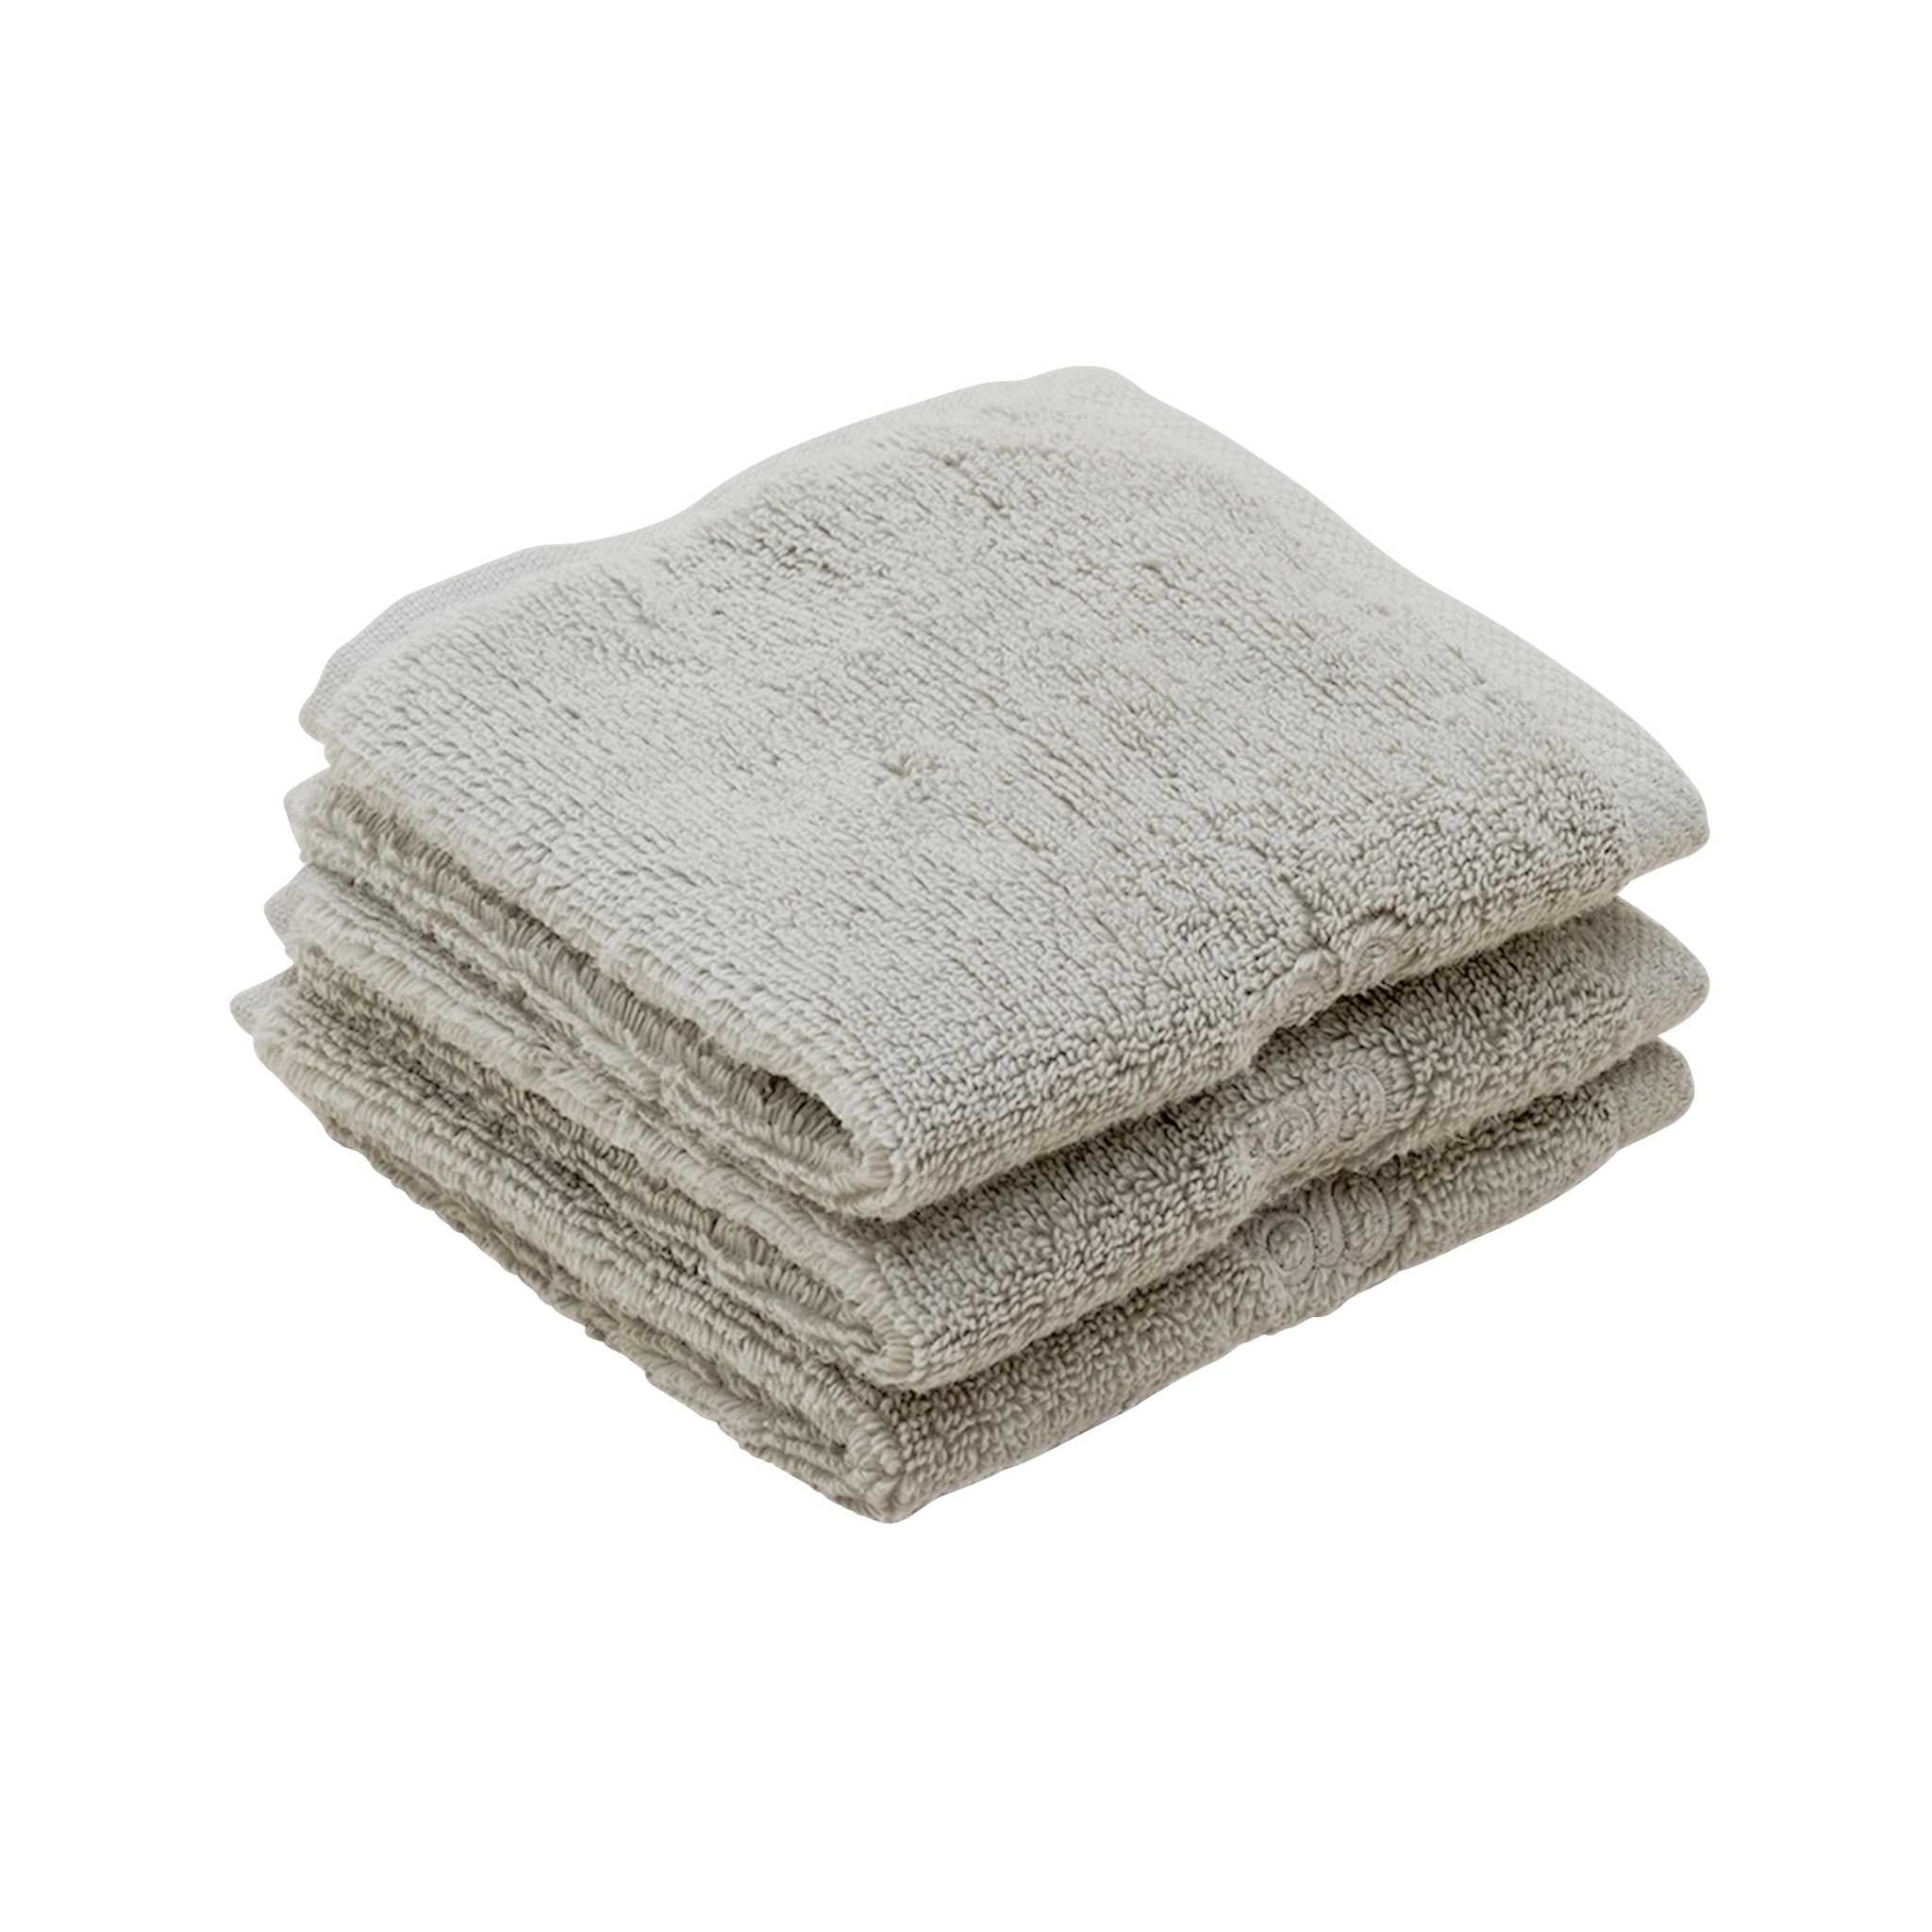 Garbo & Friends Terry Washcloths - Thyme - 3 Pack